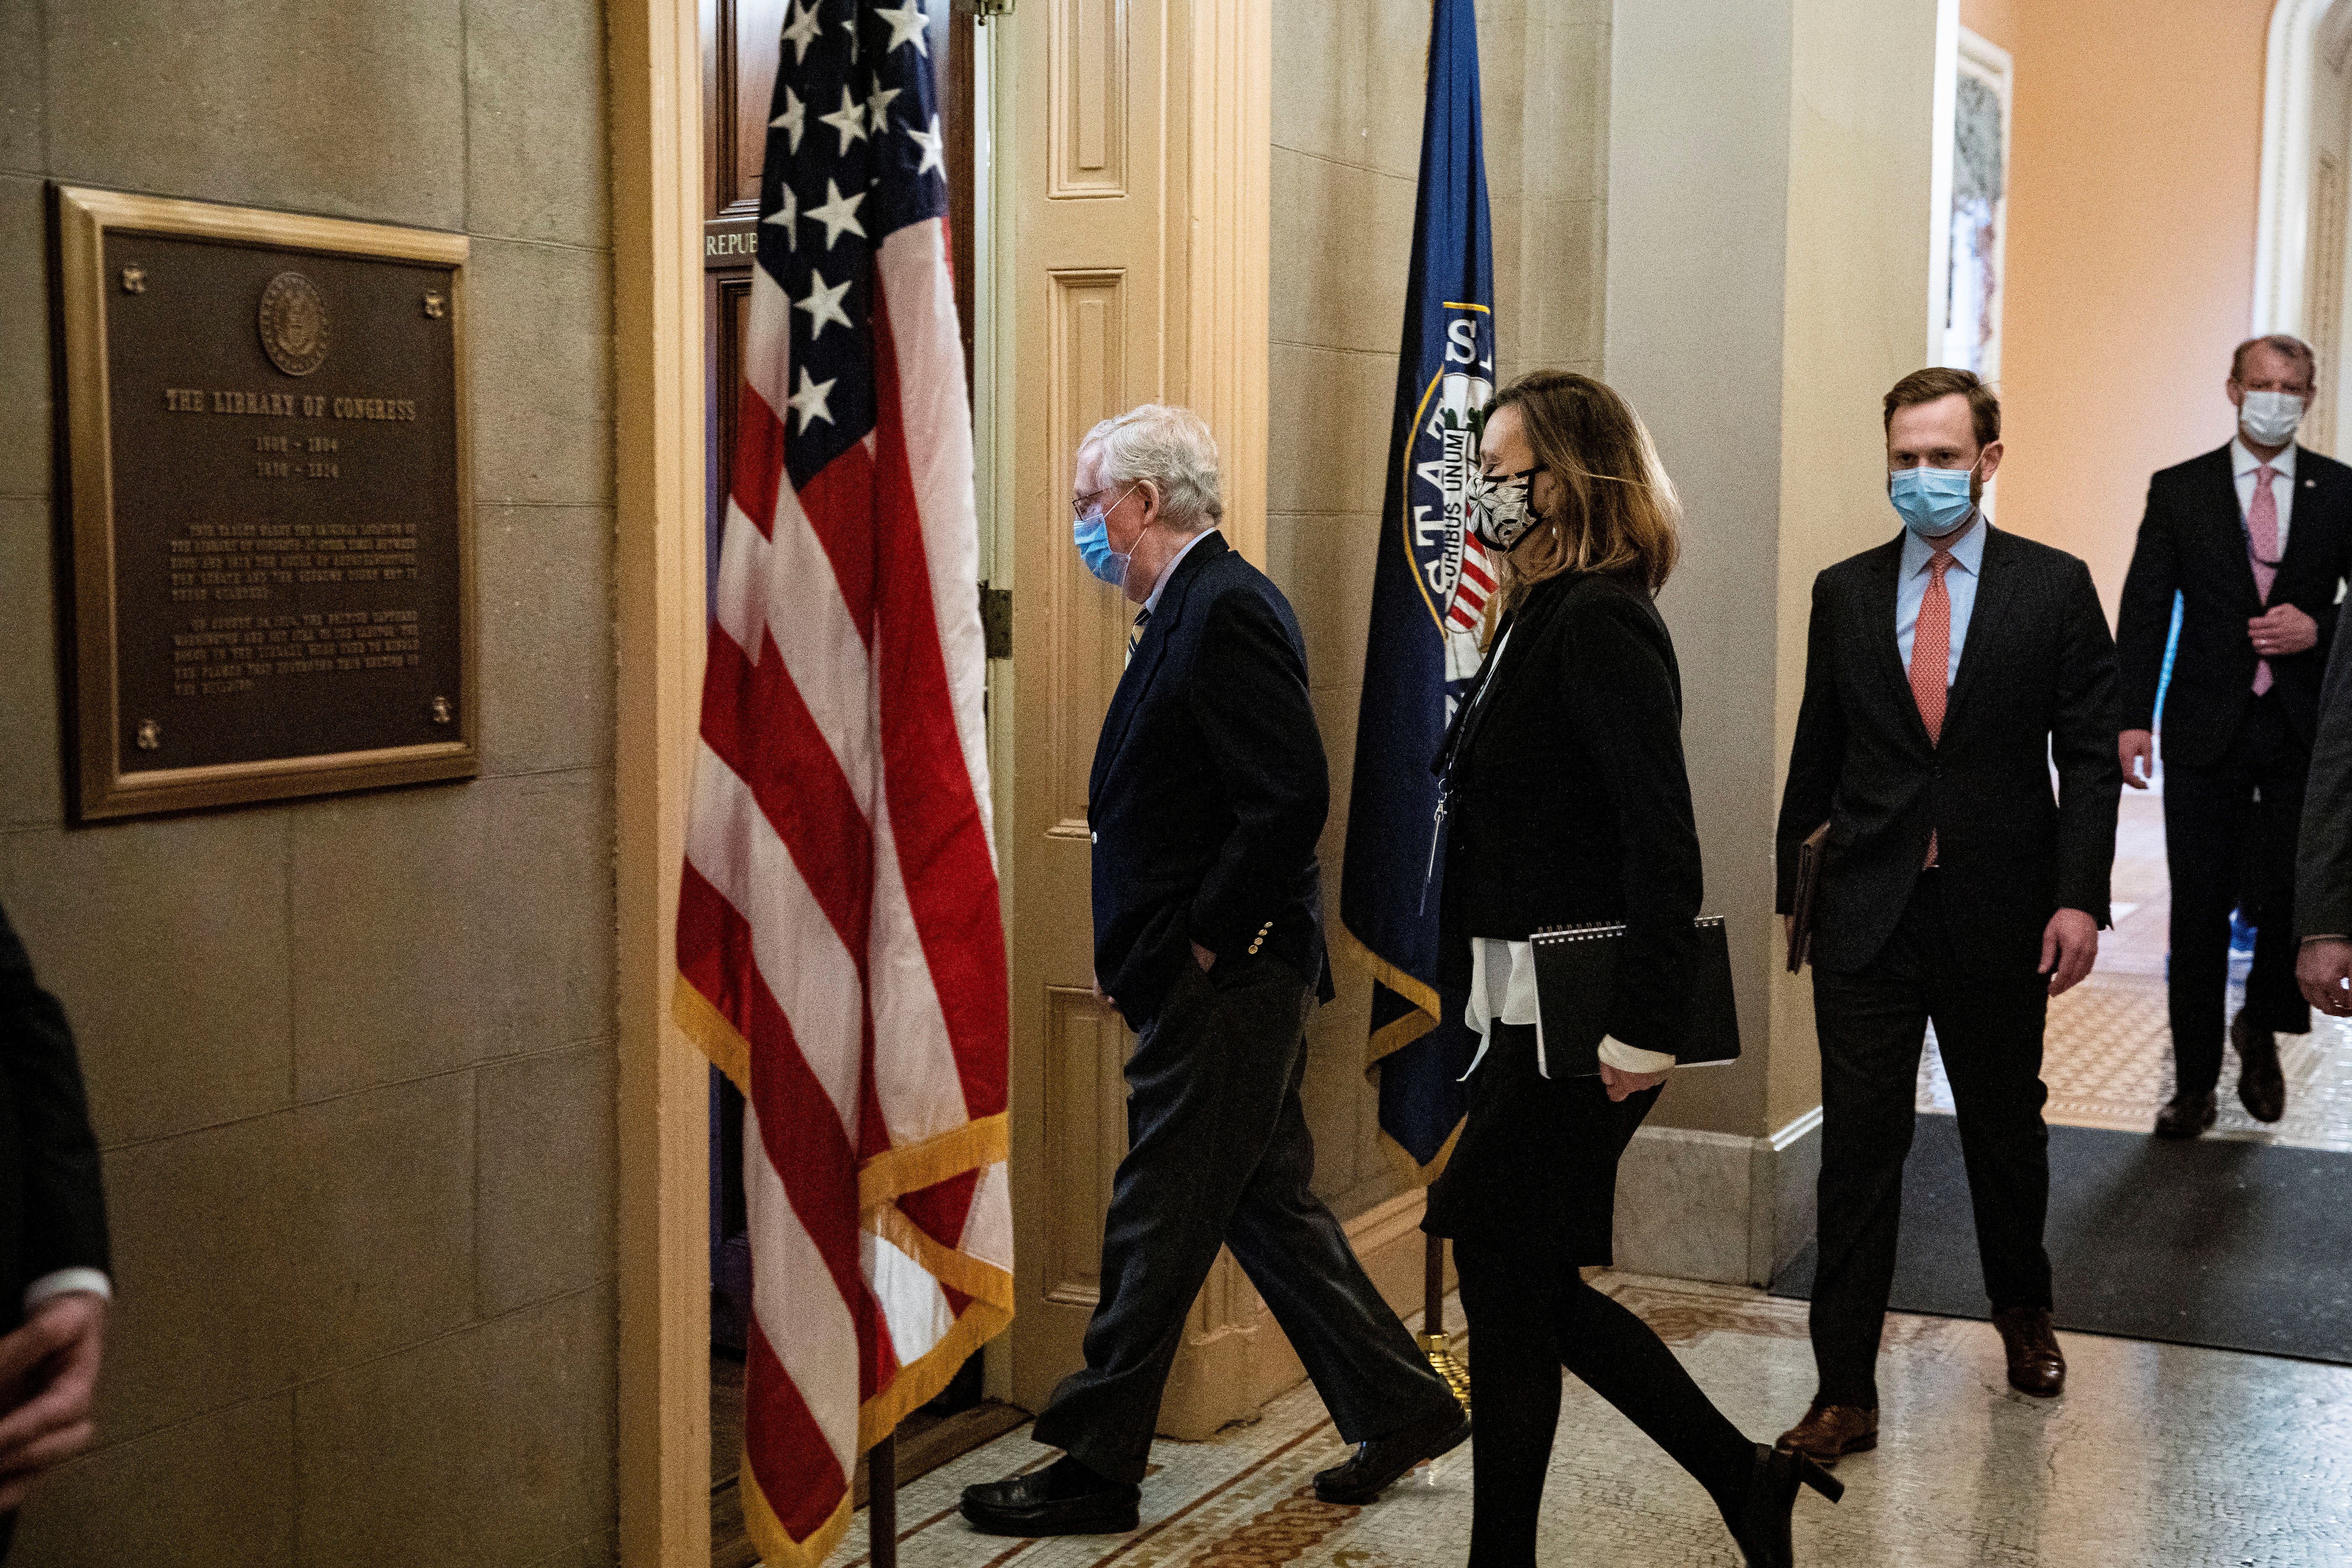 U.S. Senate Minority Leader McConnell (R-KY) arrives in his office after speaking on the Senate floor in the U.S. Capitol on the fifth day of the impeachment trial of former U.S. President Donald Trump